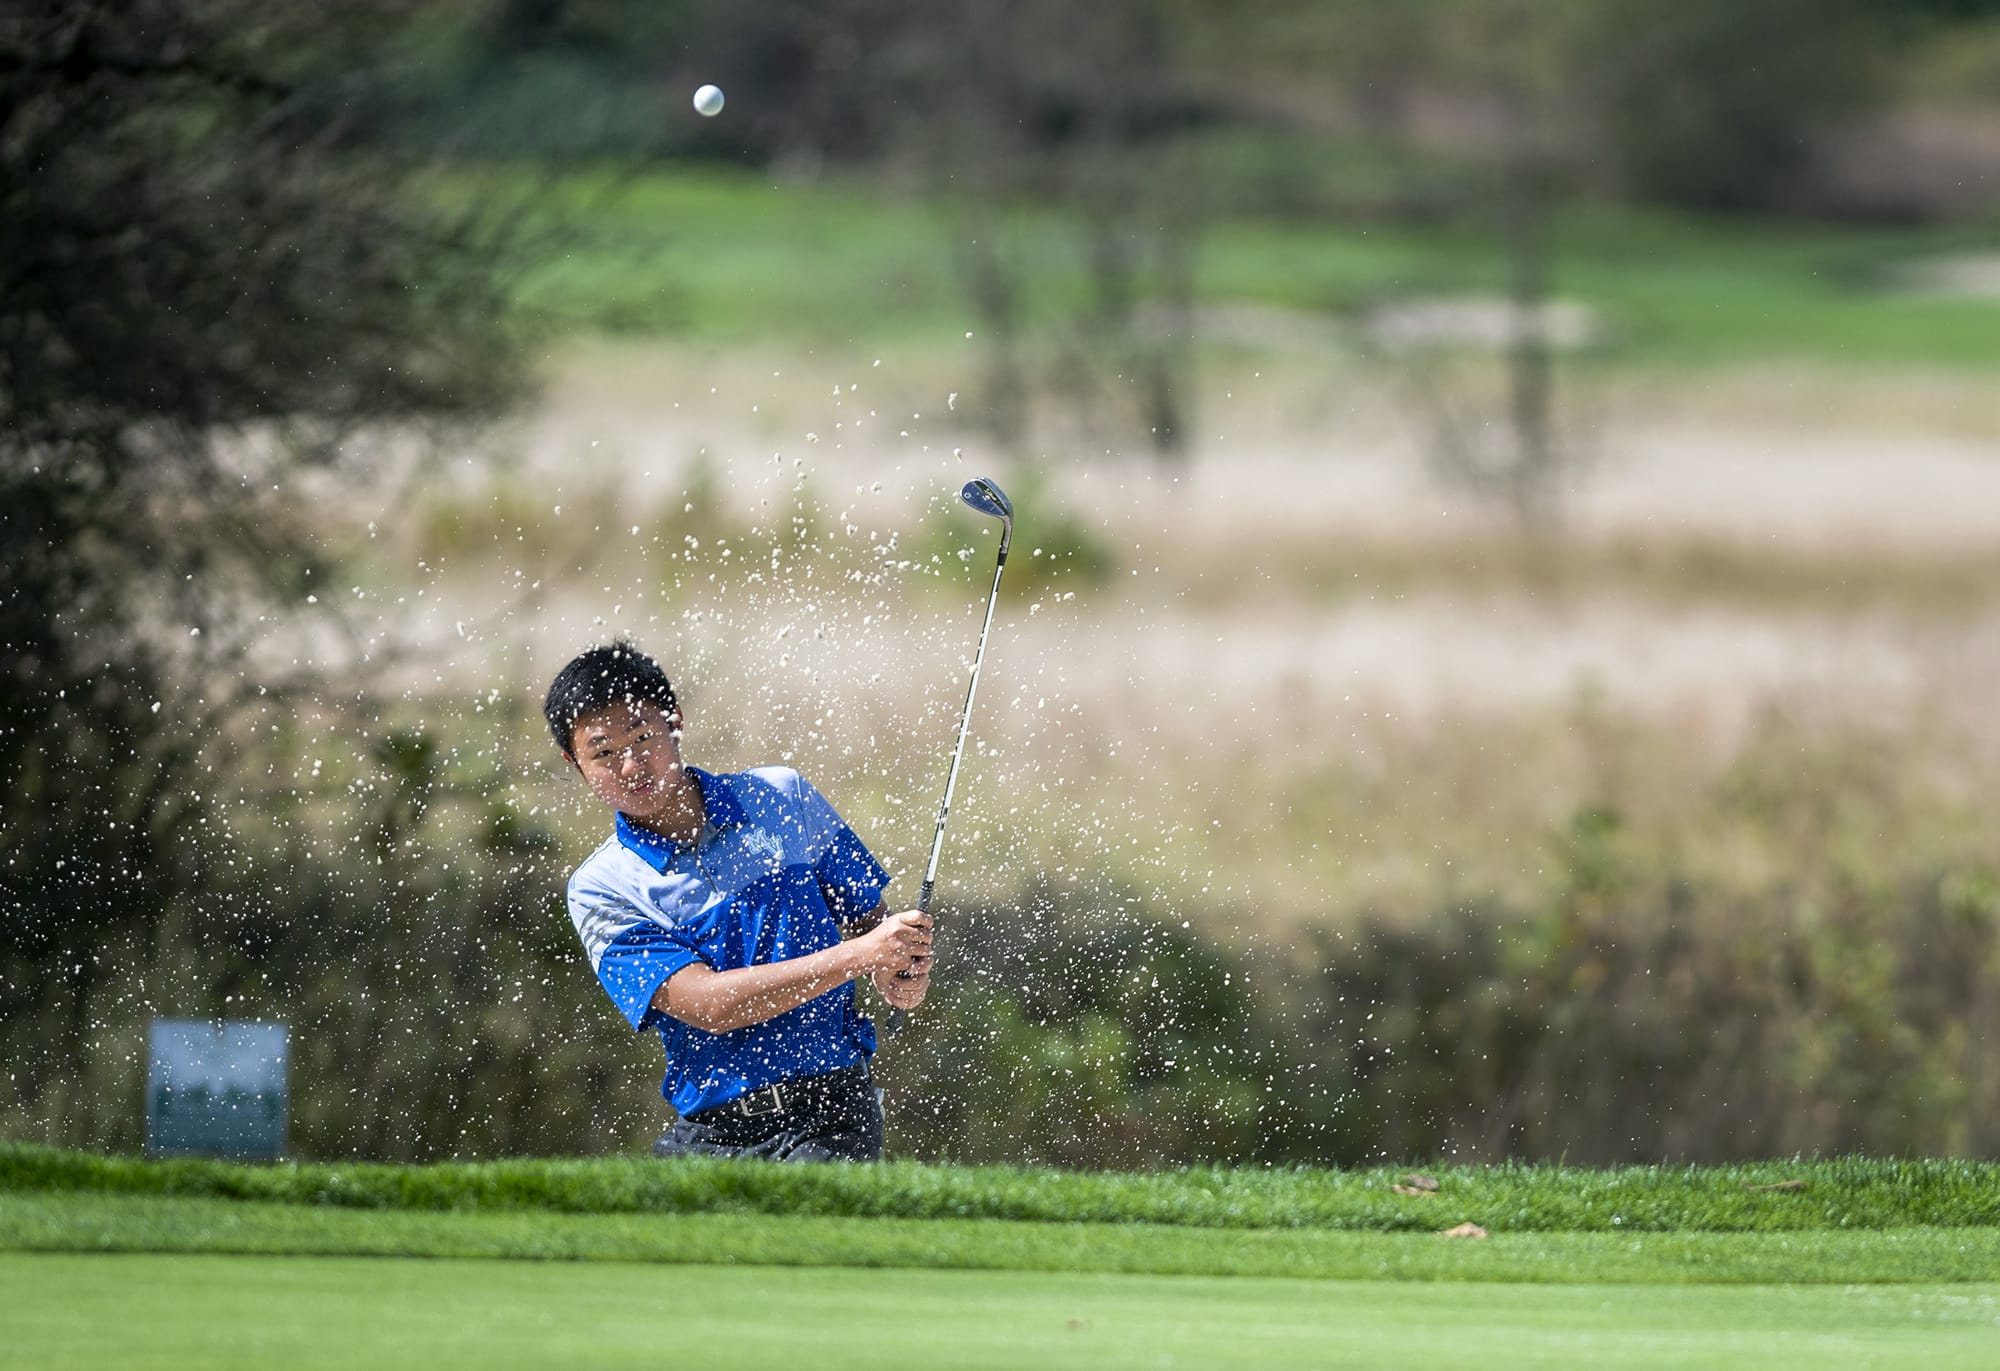 Mountain ViewÕs Willy Yeh hits from a sand trap during the Titan Cup golf tournament at Camas Meadows Golf Course on Sept. 16, 2019.